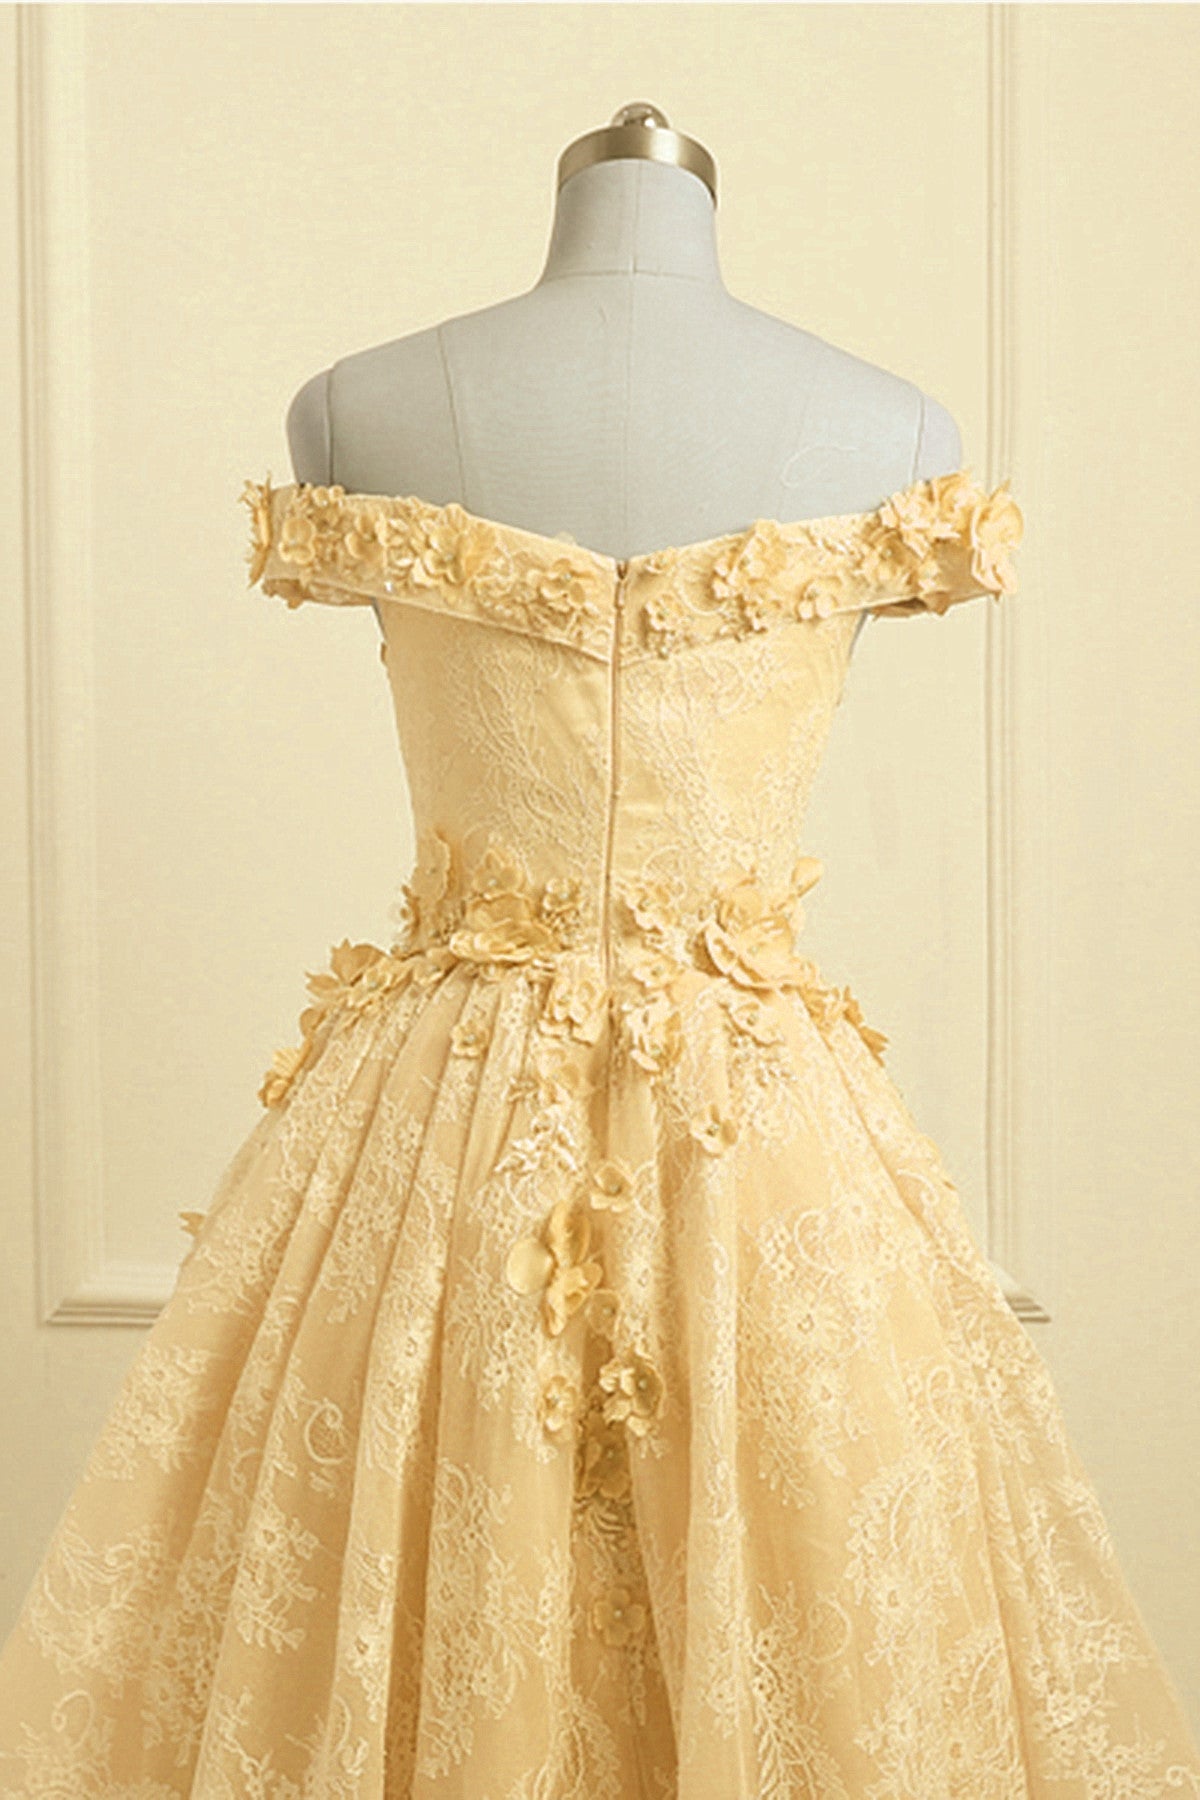 Party Dresses Australia, Lovely Yellow Off Shoulder Lace High Low Party Dress, Yellow Formal Dress